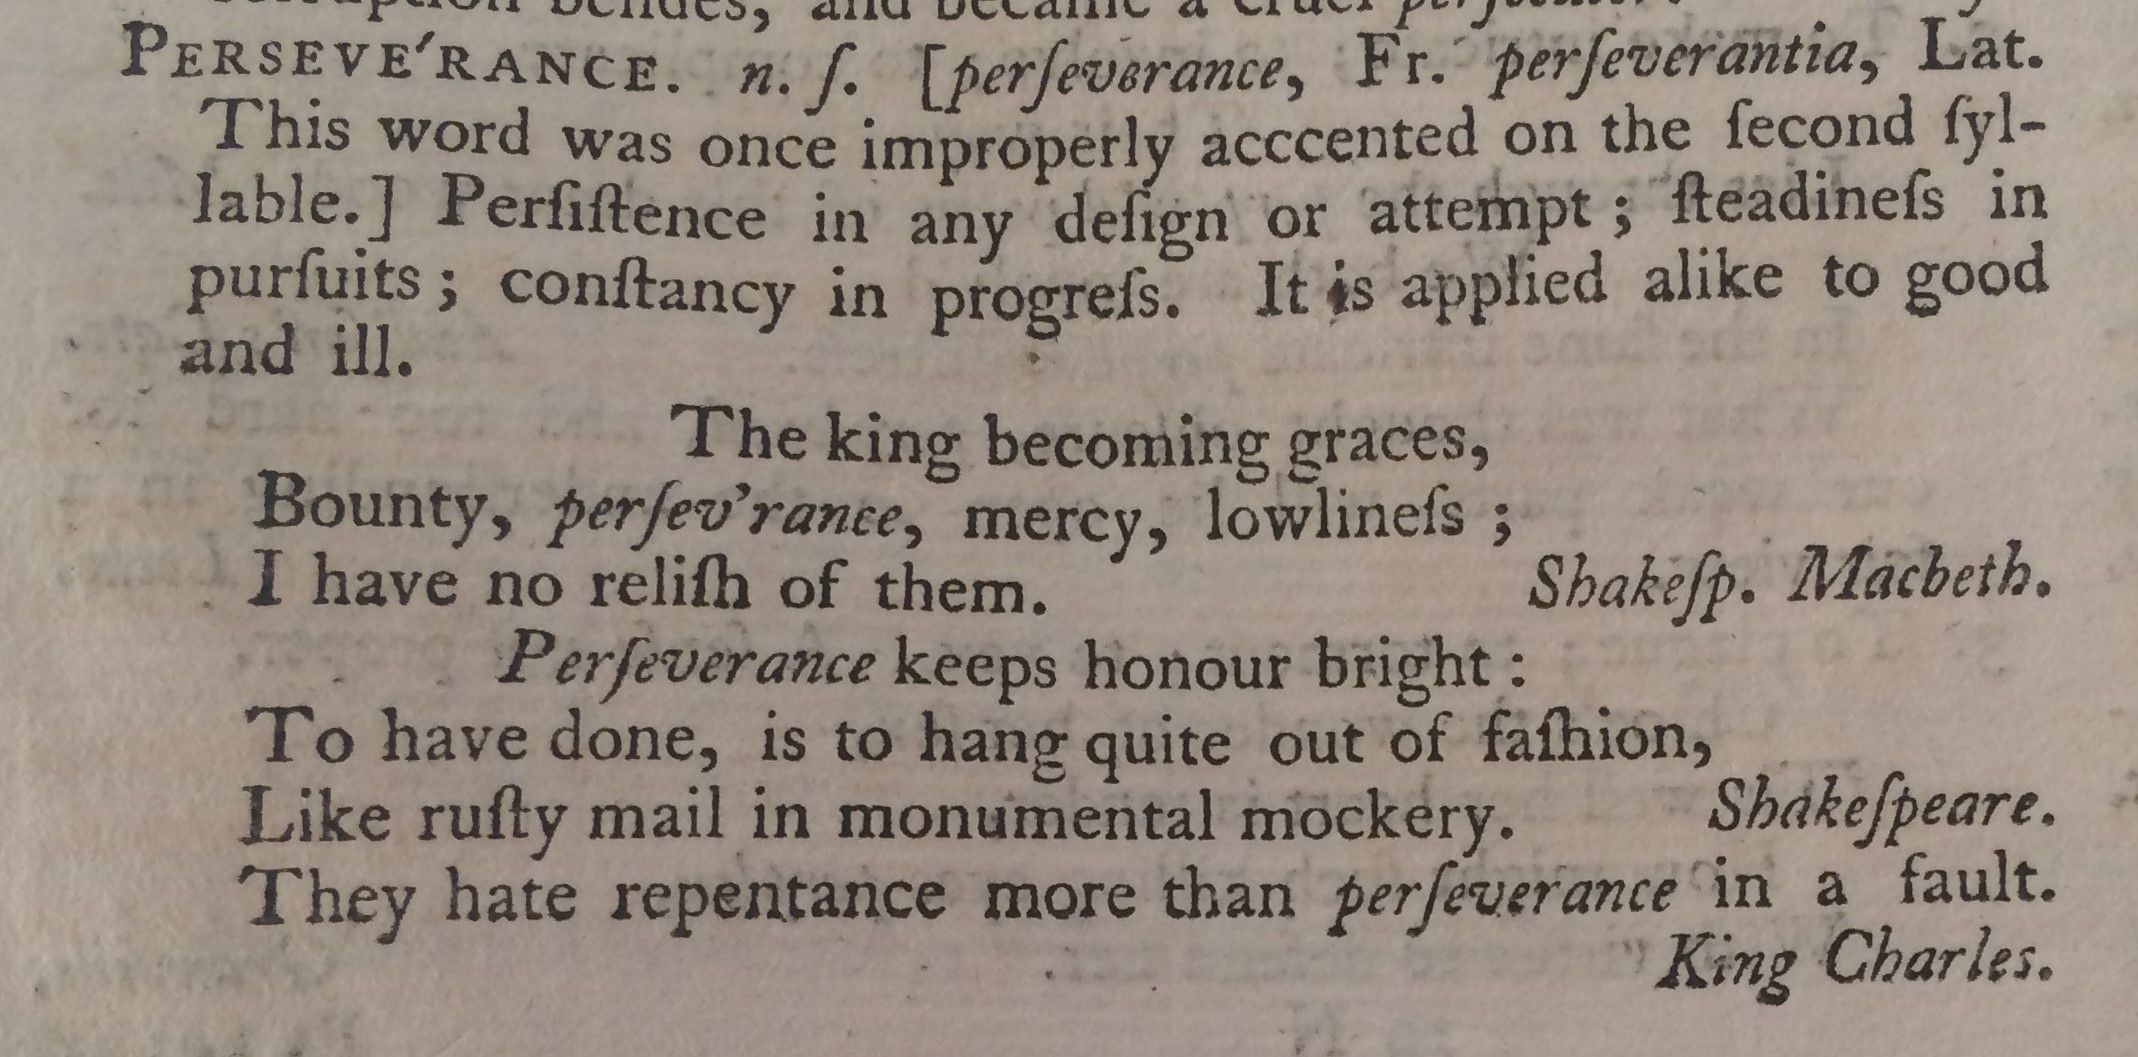 PERSEVE'RANCE. n.s. [perseverance, Fr. perseverantia, Lat. This word was once improperly accented on the second syllable.] Persistence in any design or attempt; steadiness in pursuits; constancy in progress. It is applied alike to good and ill. The king becoming graces, Bounty, persev’rance, mercy, lowliness; I have no relish of them. Shakesp. Macbeth. Perseverance keeps honour bright: To have done, is to hang quite out of fashion, Like rusty mail in monumental mockery. Shakespeare. They hate repentance more than perseverance in a fault. King Charles. Wait the seasons of providence with patience and perseverance in the duties of our calling, what difficulties soever we may encounter. L’Estrange. Patience and perseverance overcome the greatest difficulties. Clarissa. And perseverance with his batter’d shield. Brooke.